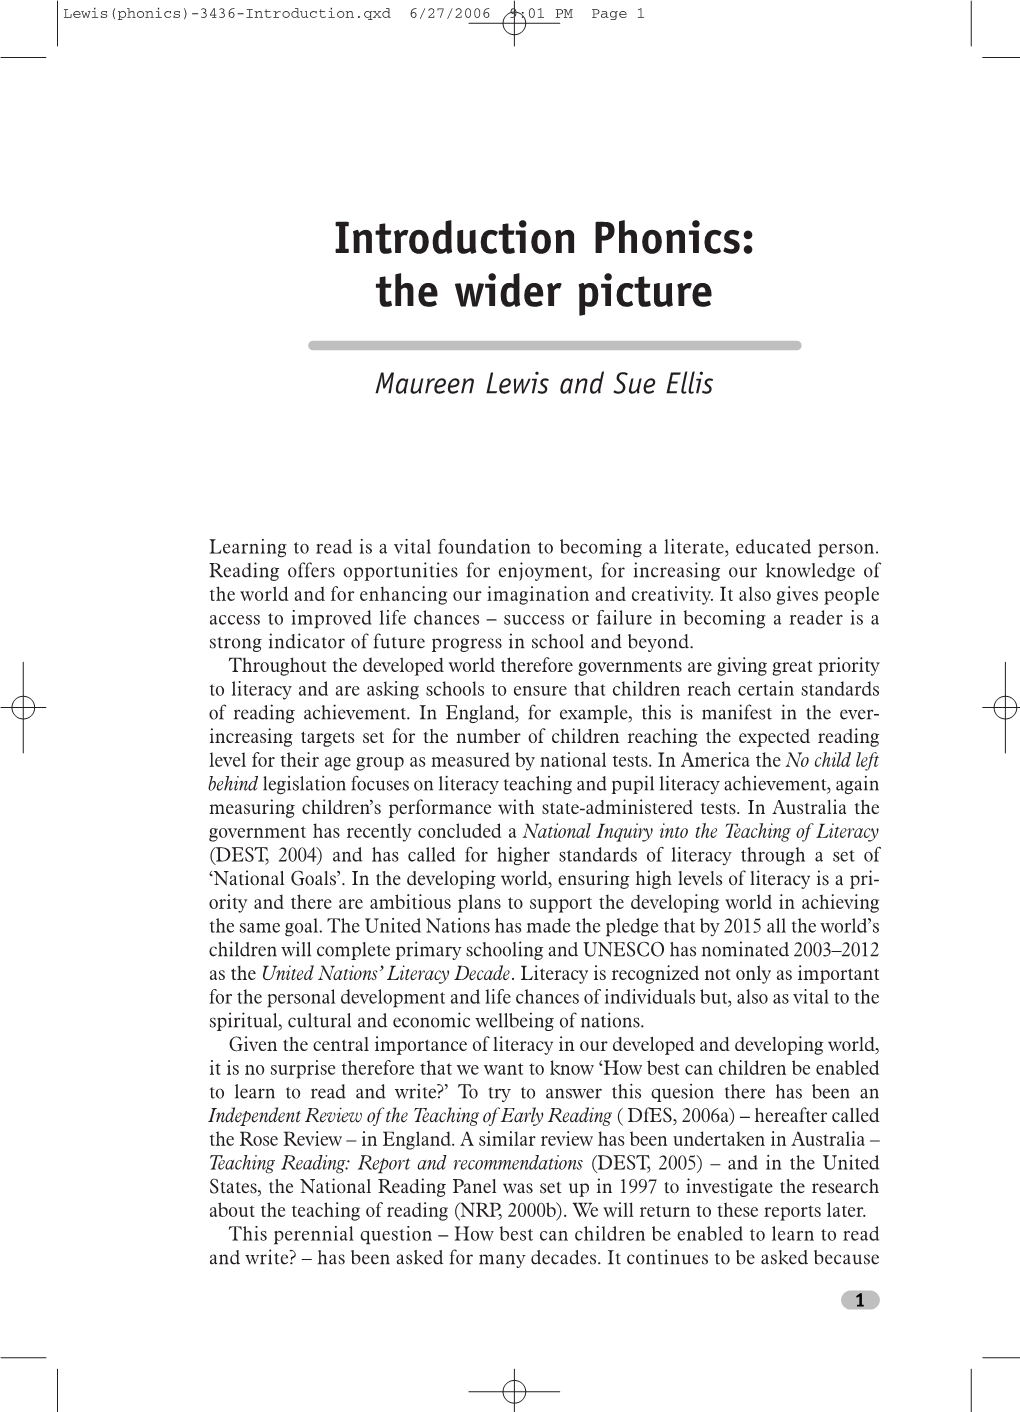 Introduction Phonics: the Wider Picture